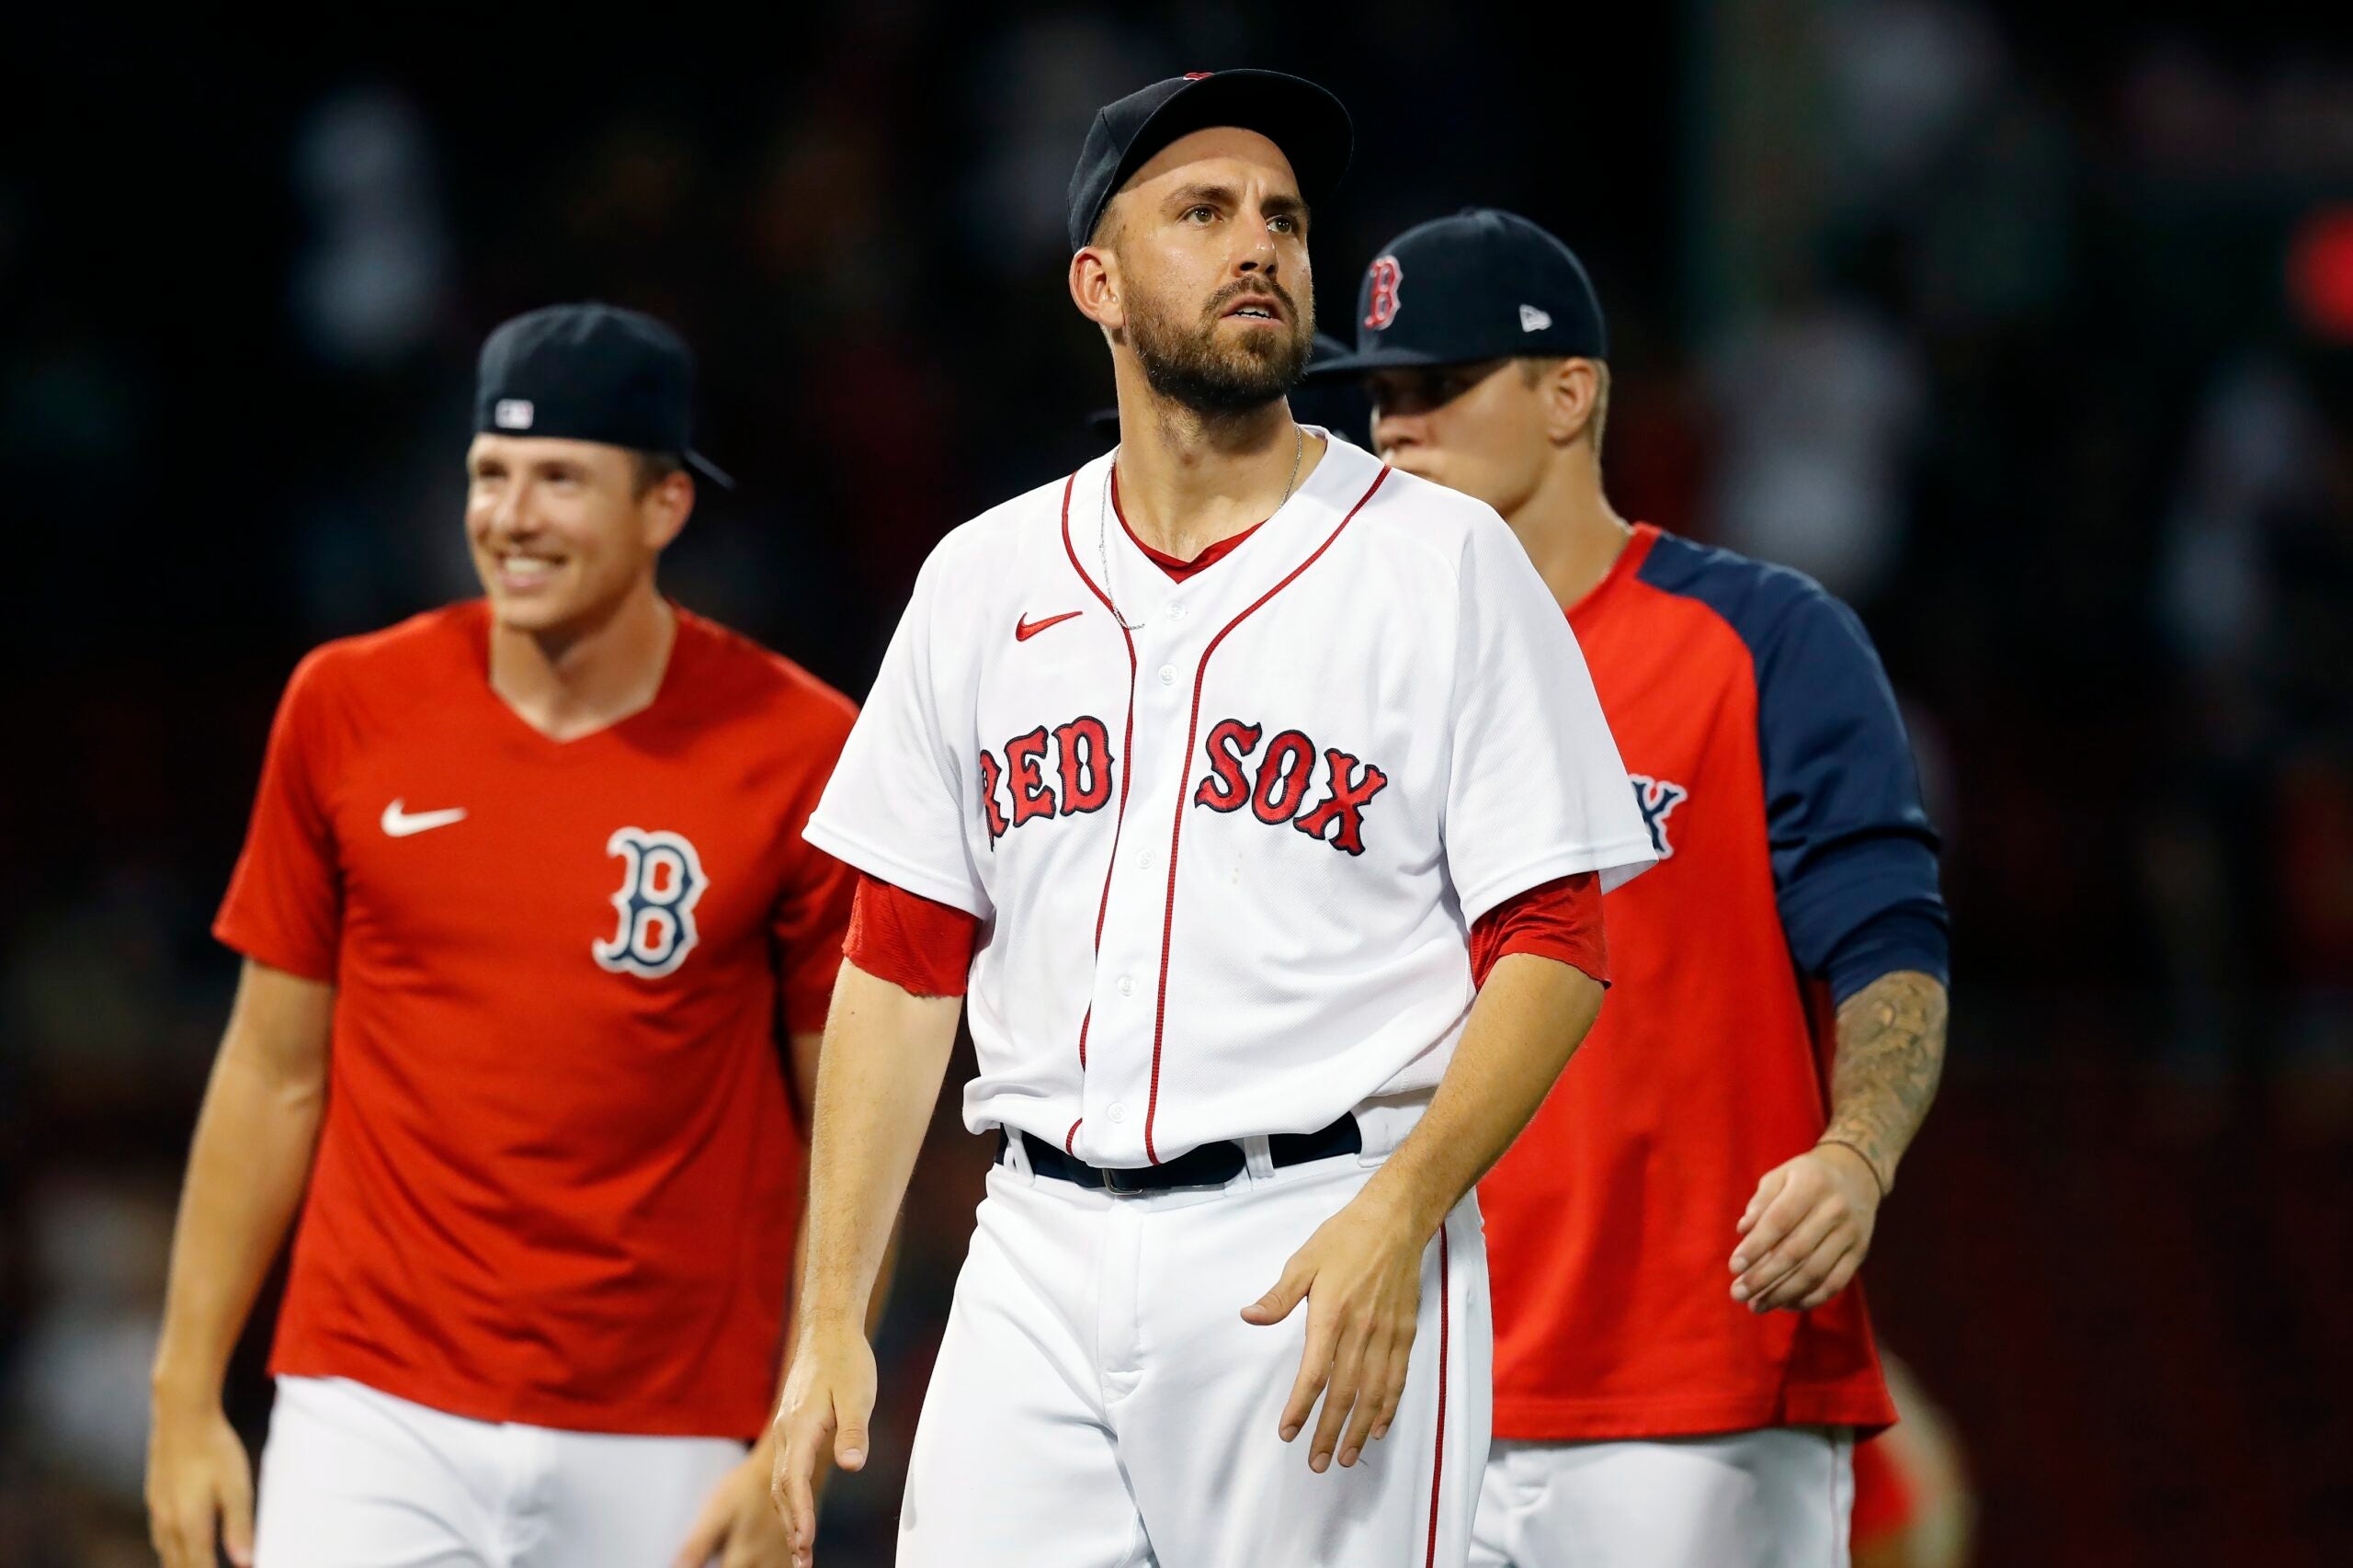 Matt Barnes, eight others cleared to rejoin Red Sox after